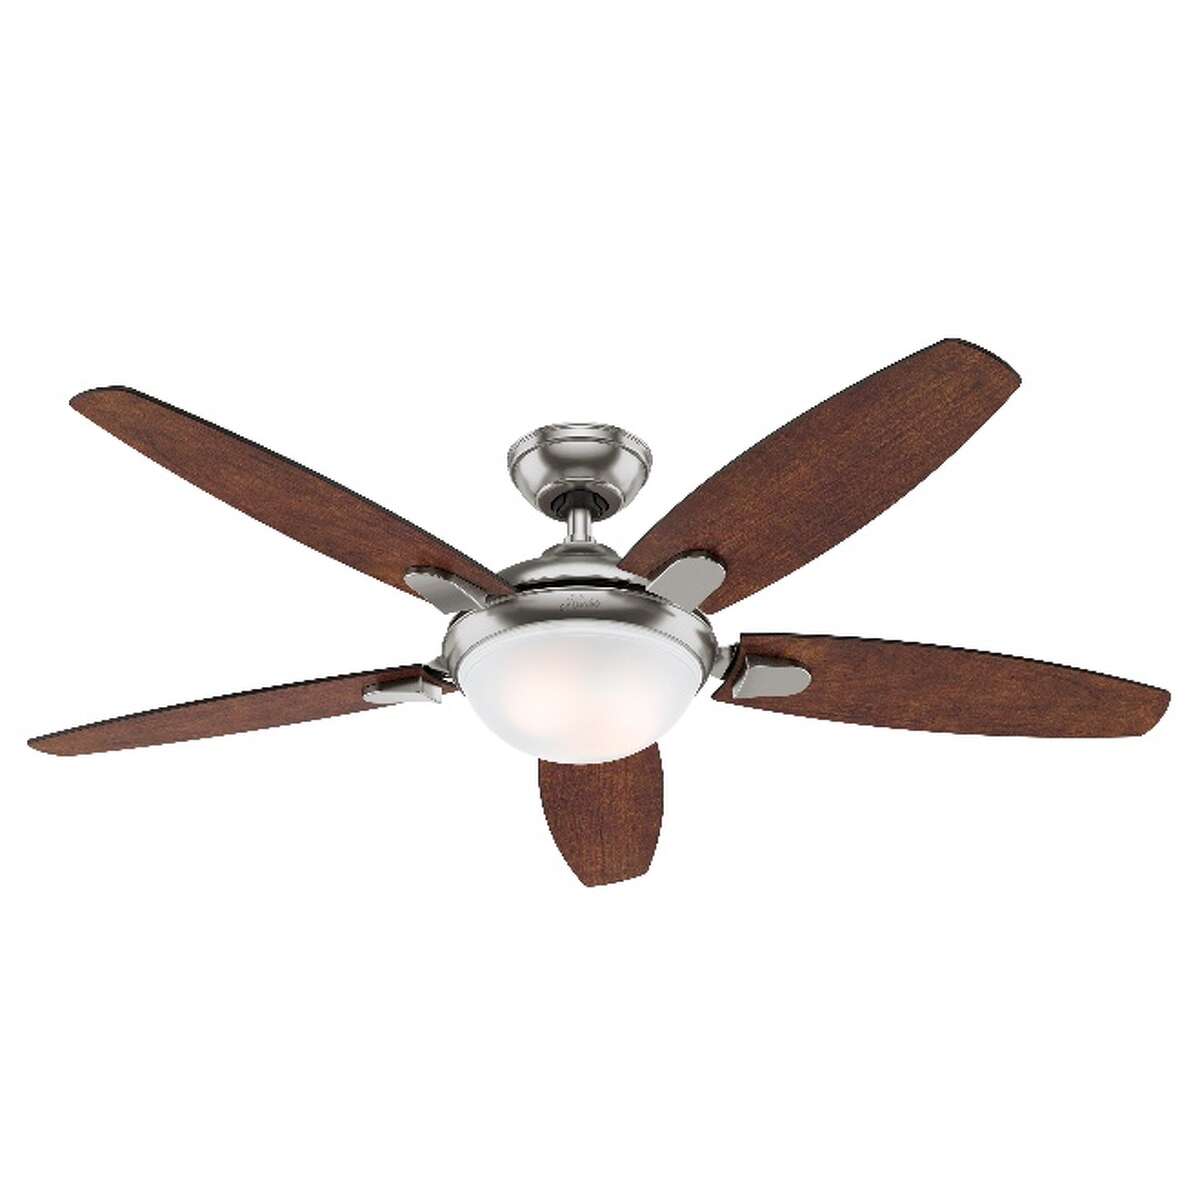 Product Name: Hunter Contempo ceiling fans Safety Concerns: The owner’s manual instructs consumers to install the light globe incorrectly and the light globe can fall, posing an impact injury hazard. Recall Date: December 14, 2017 Source: CPSC